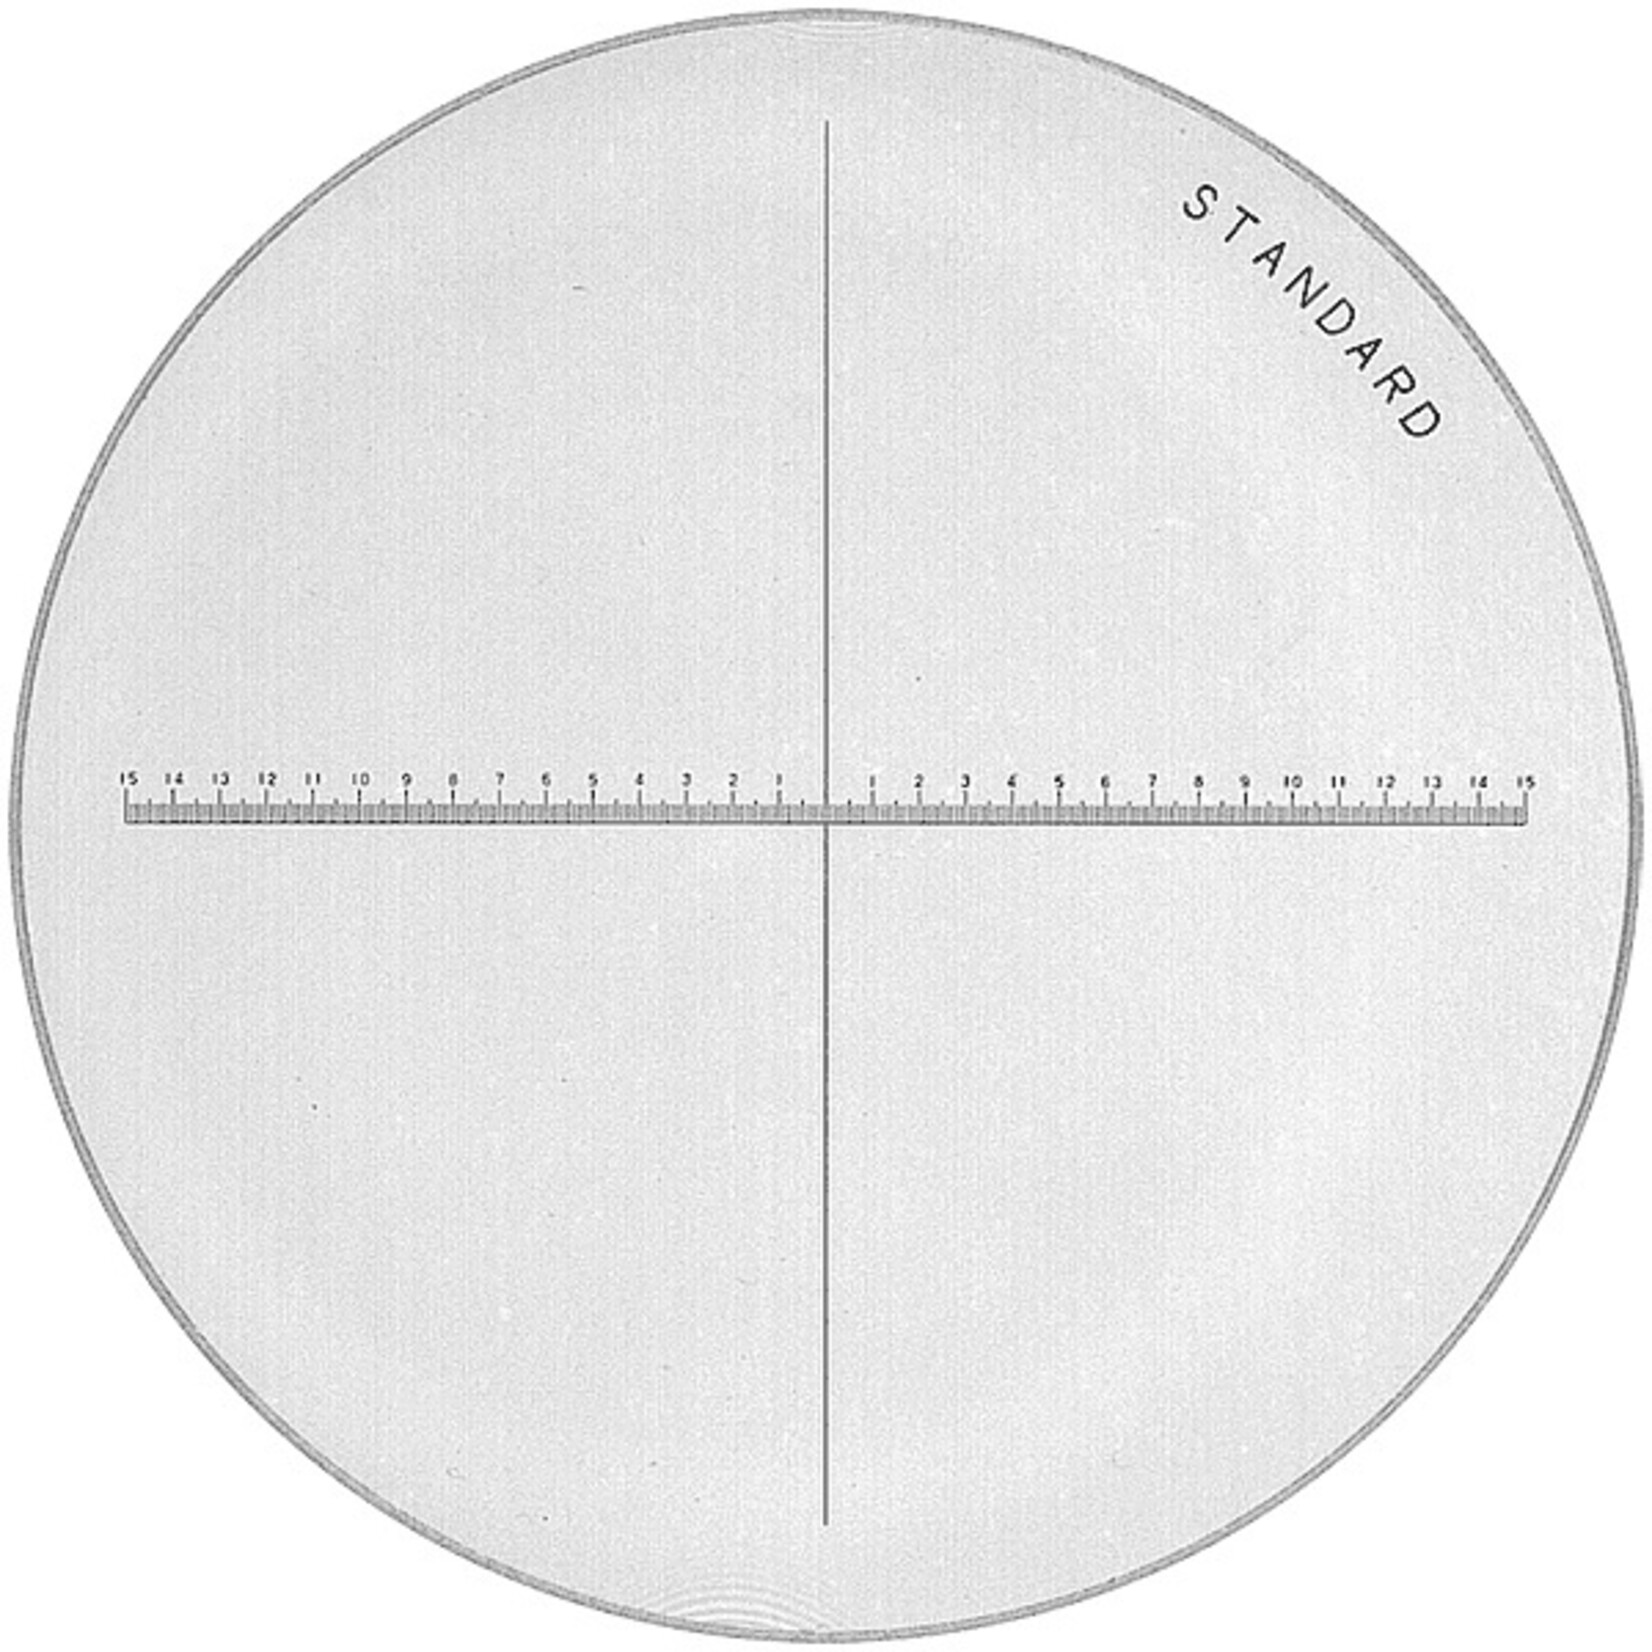 Scales for measuring loupes 1983, 2028, 2004 and KIMAG-10 in black